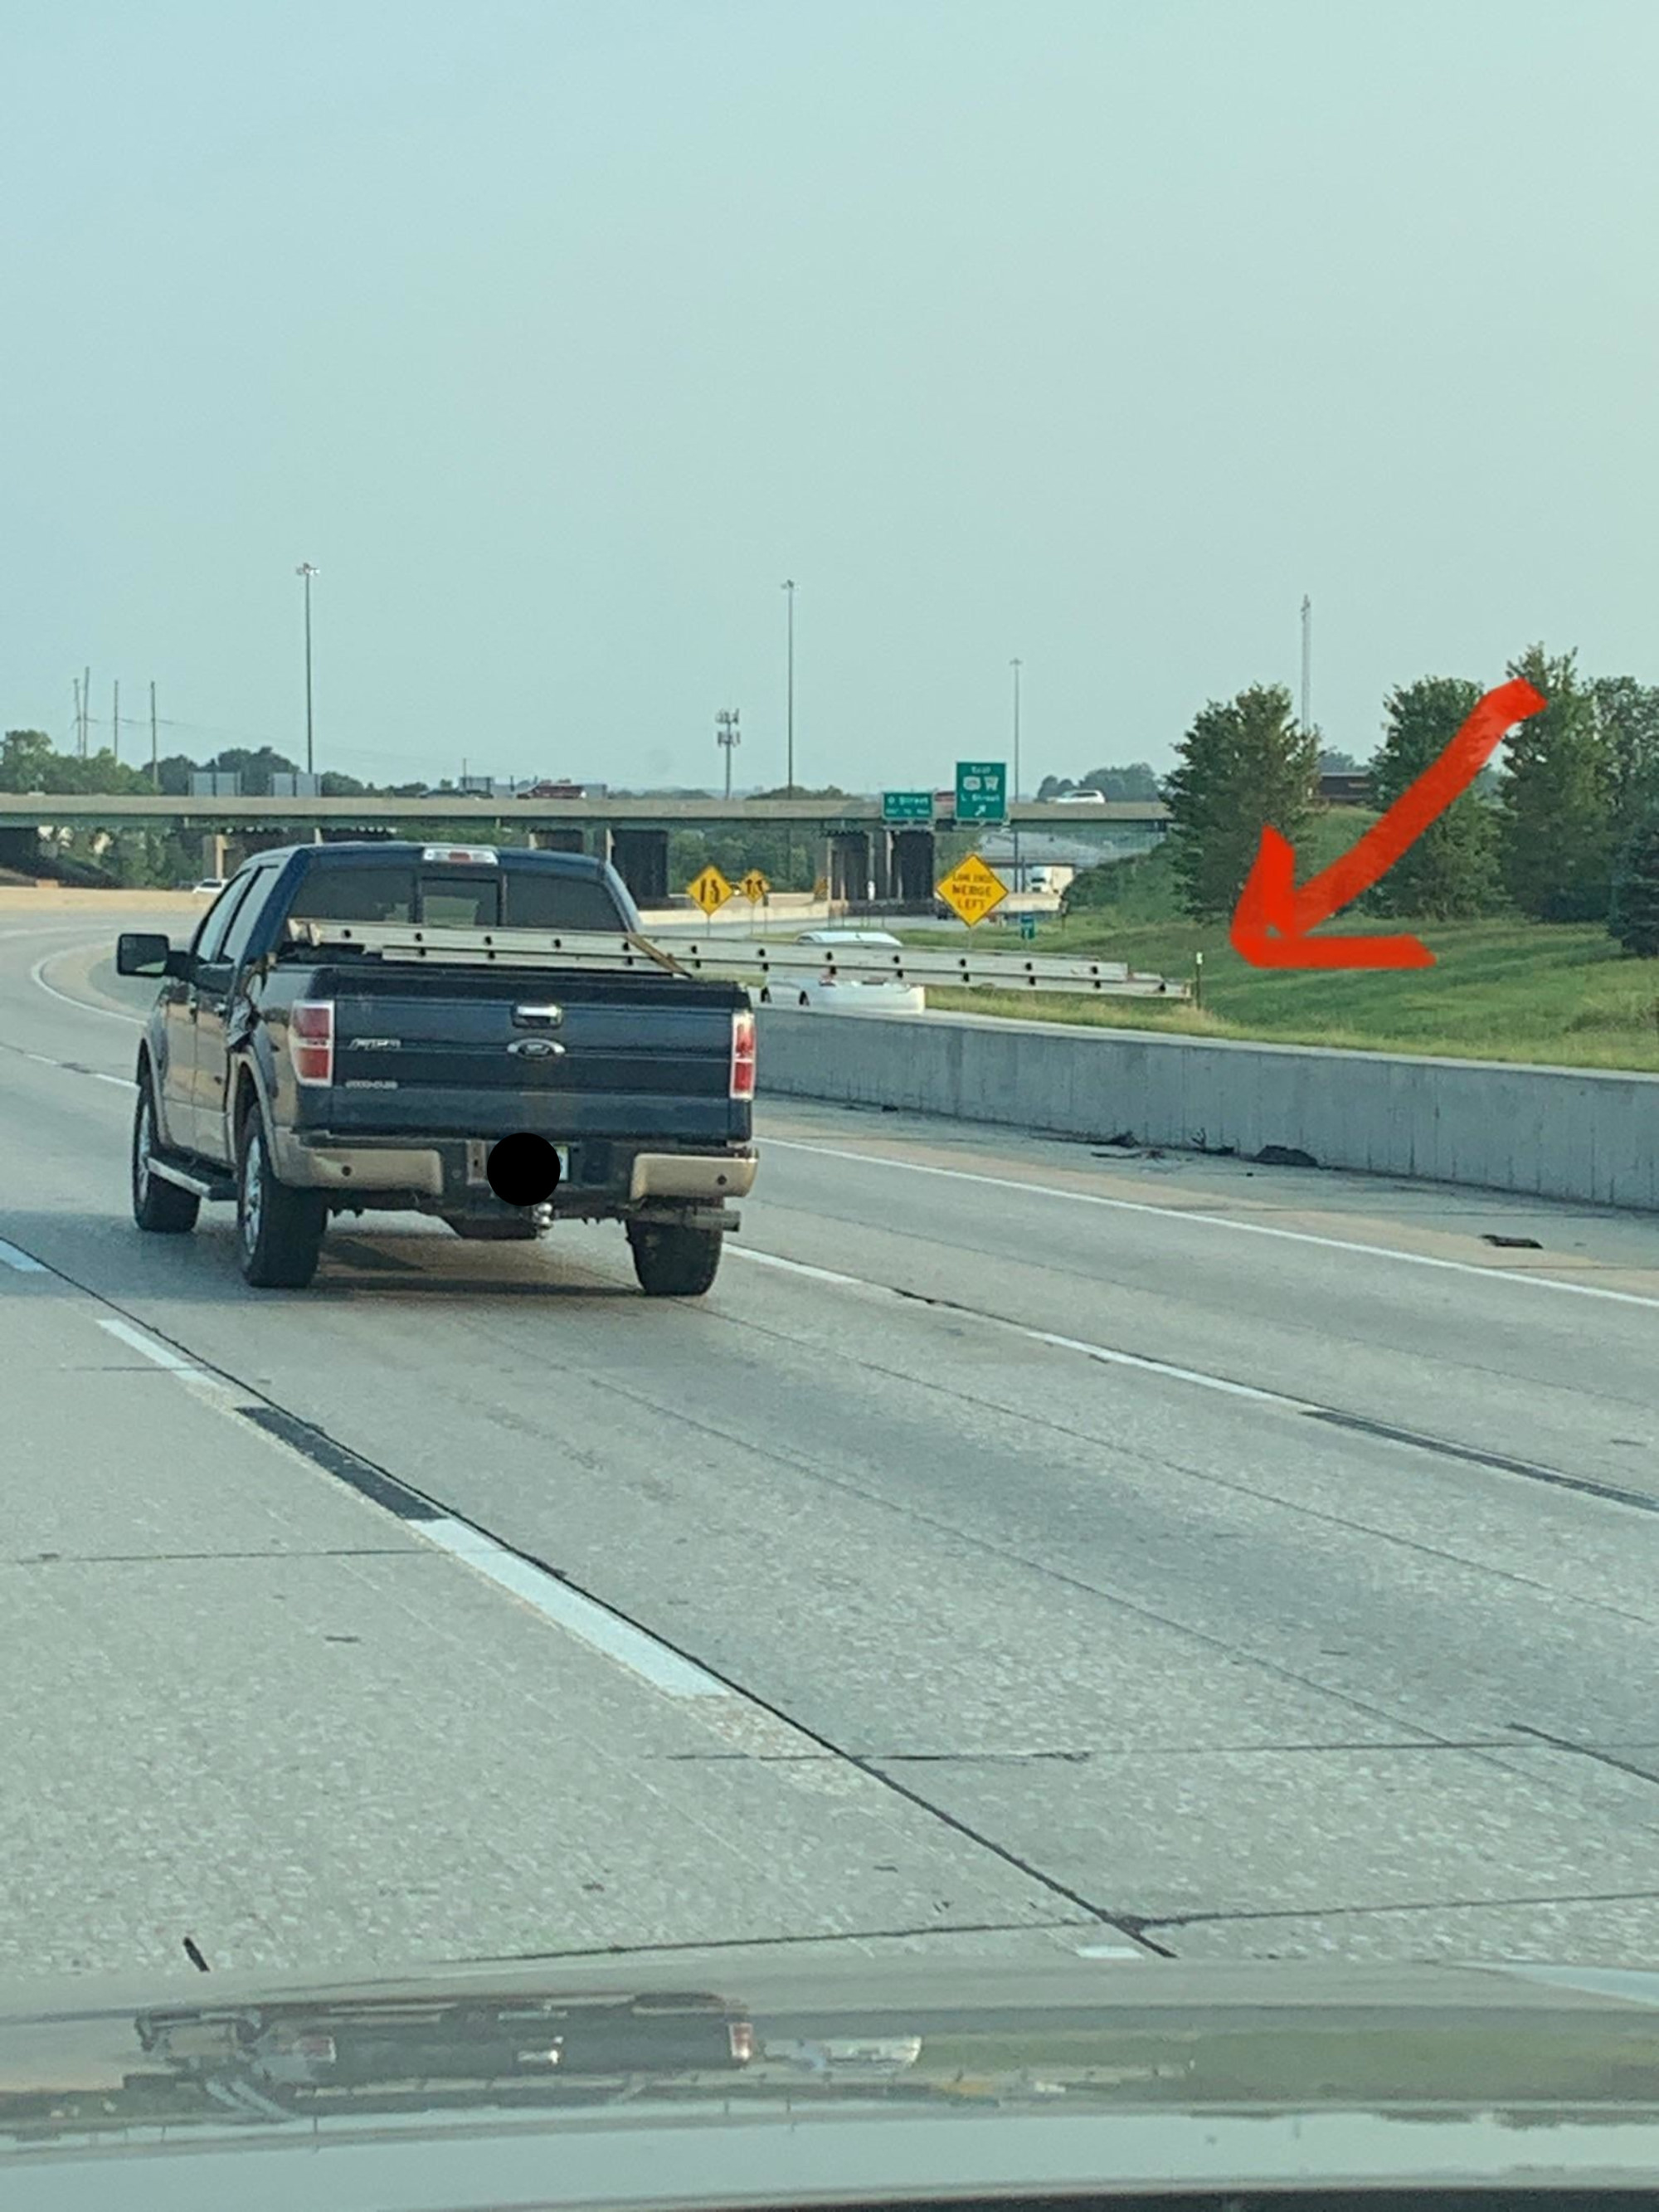 Pickup truck with a ladder in the back that extends across another highway lane